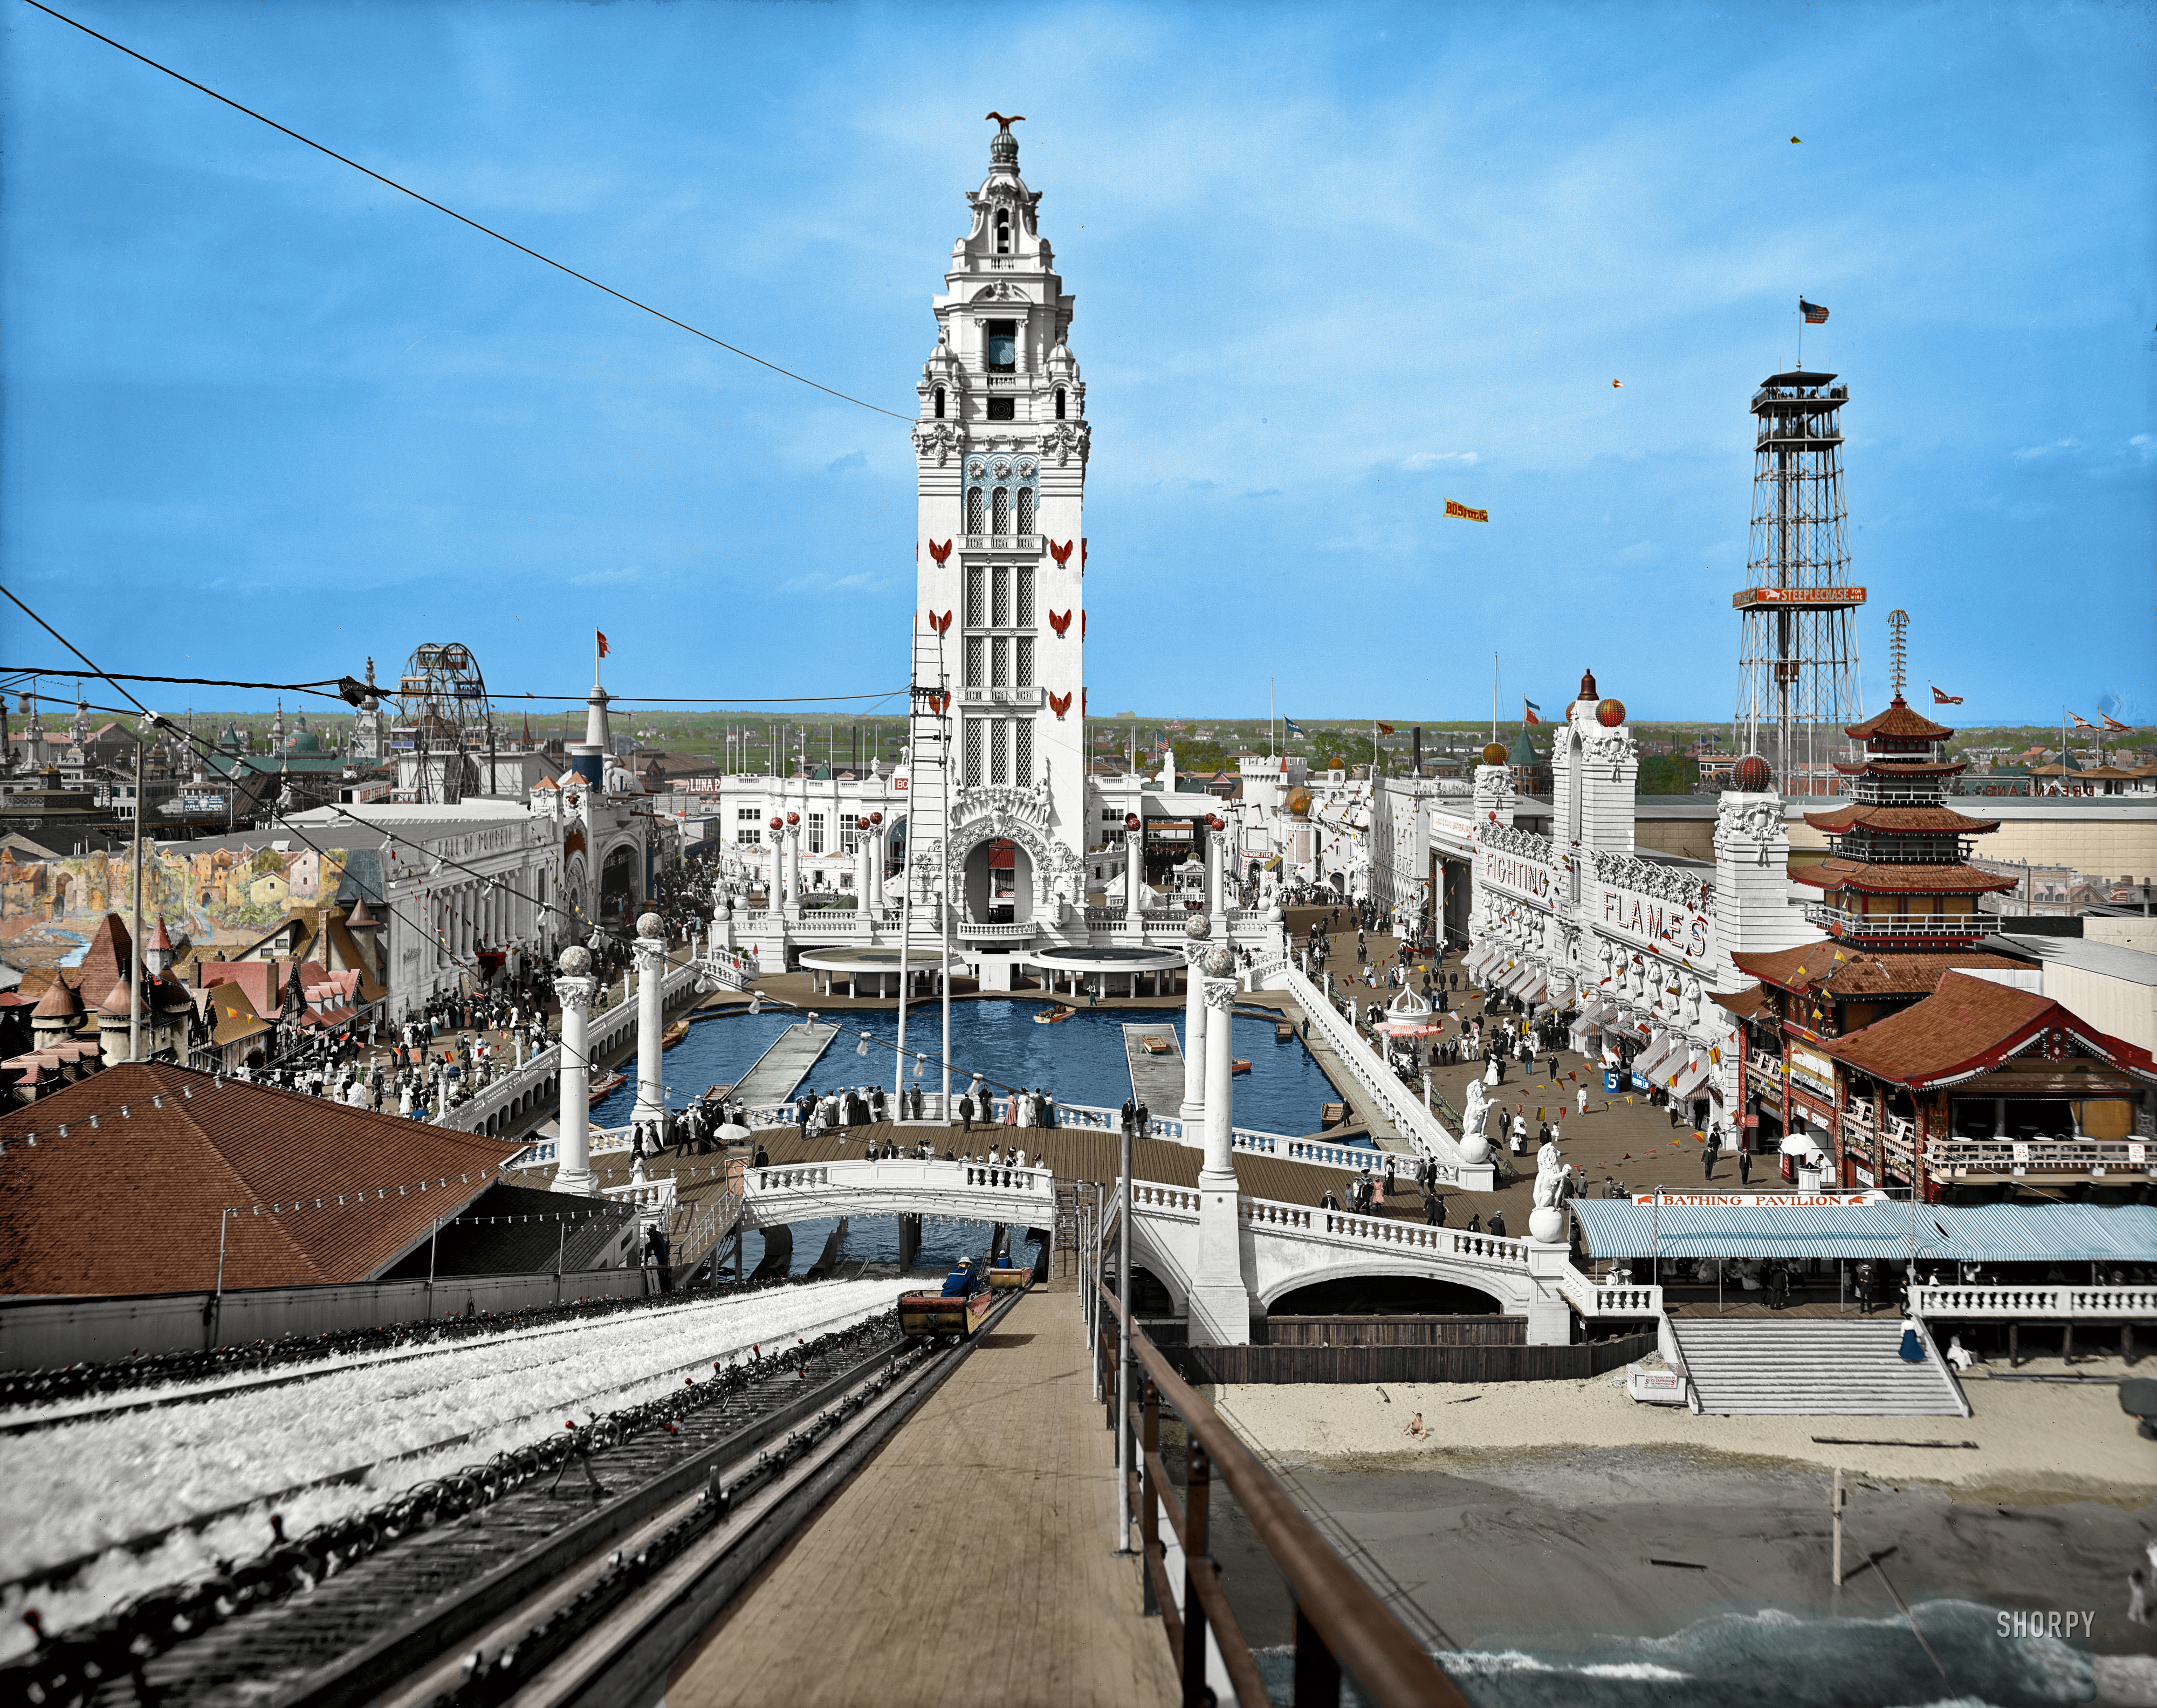 New York circa 1905. "Dreamland Park, Coney Island" (original image). It's hard to believe it all burned to the ground. This was one heck of a coloring job but I was  intrigued to see Dreamland as it might have been. If only we could visit this amazing place. View full size.